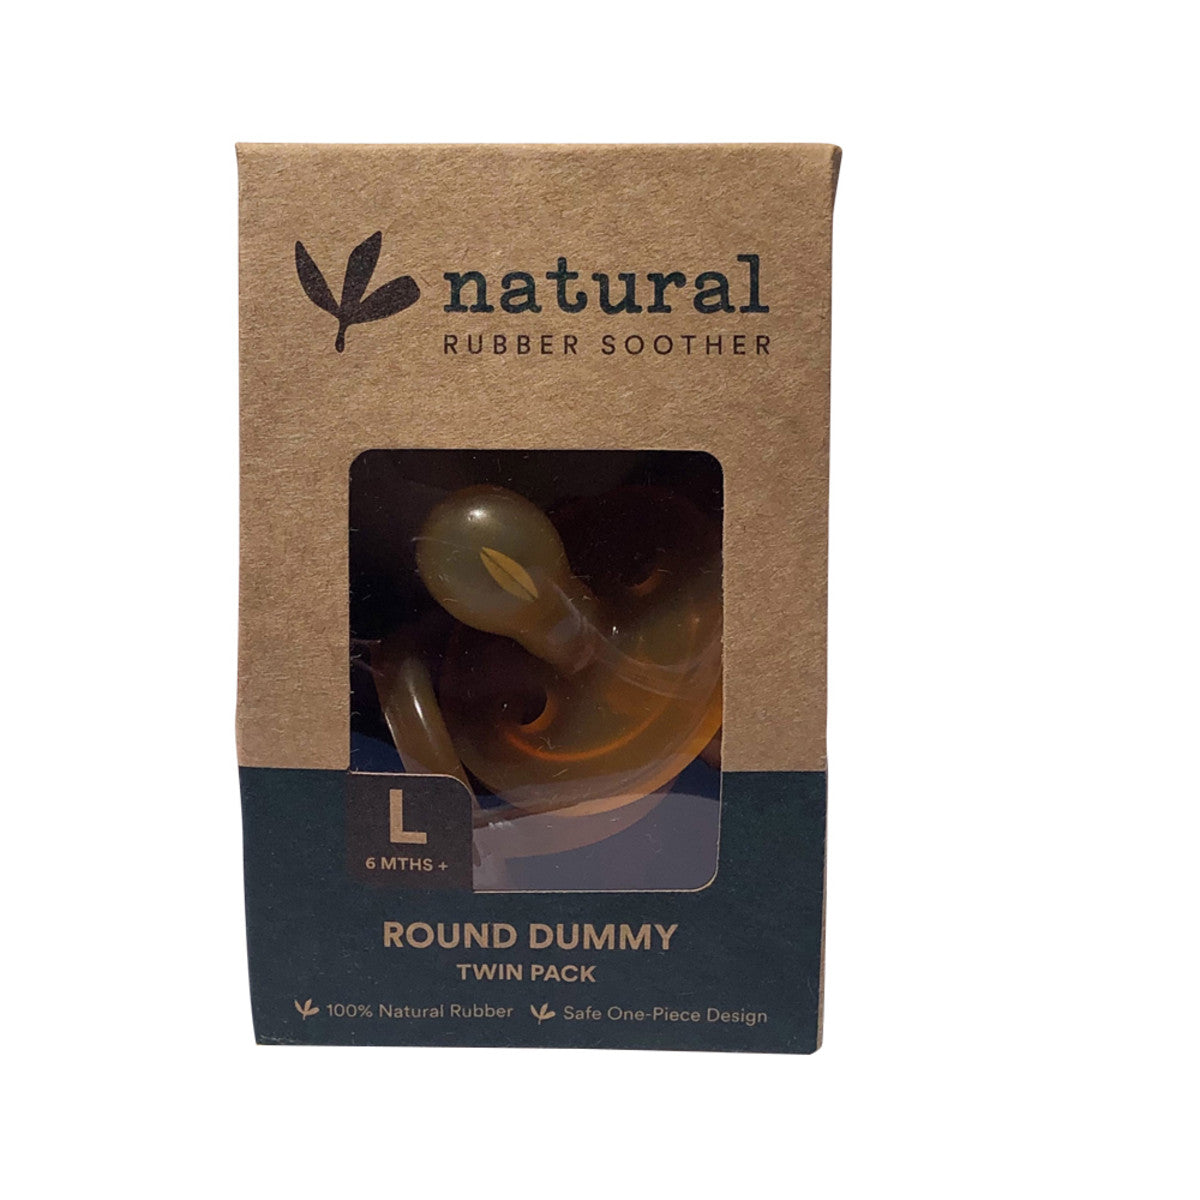 Natural Rubber Soother - Round Dummy Large (6+ Months) Twin